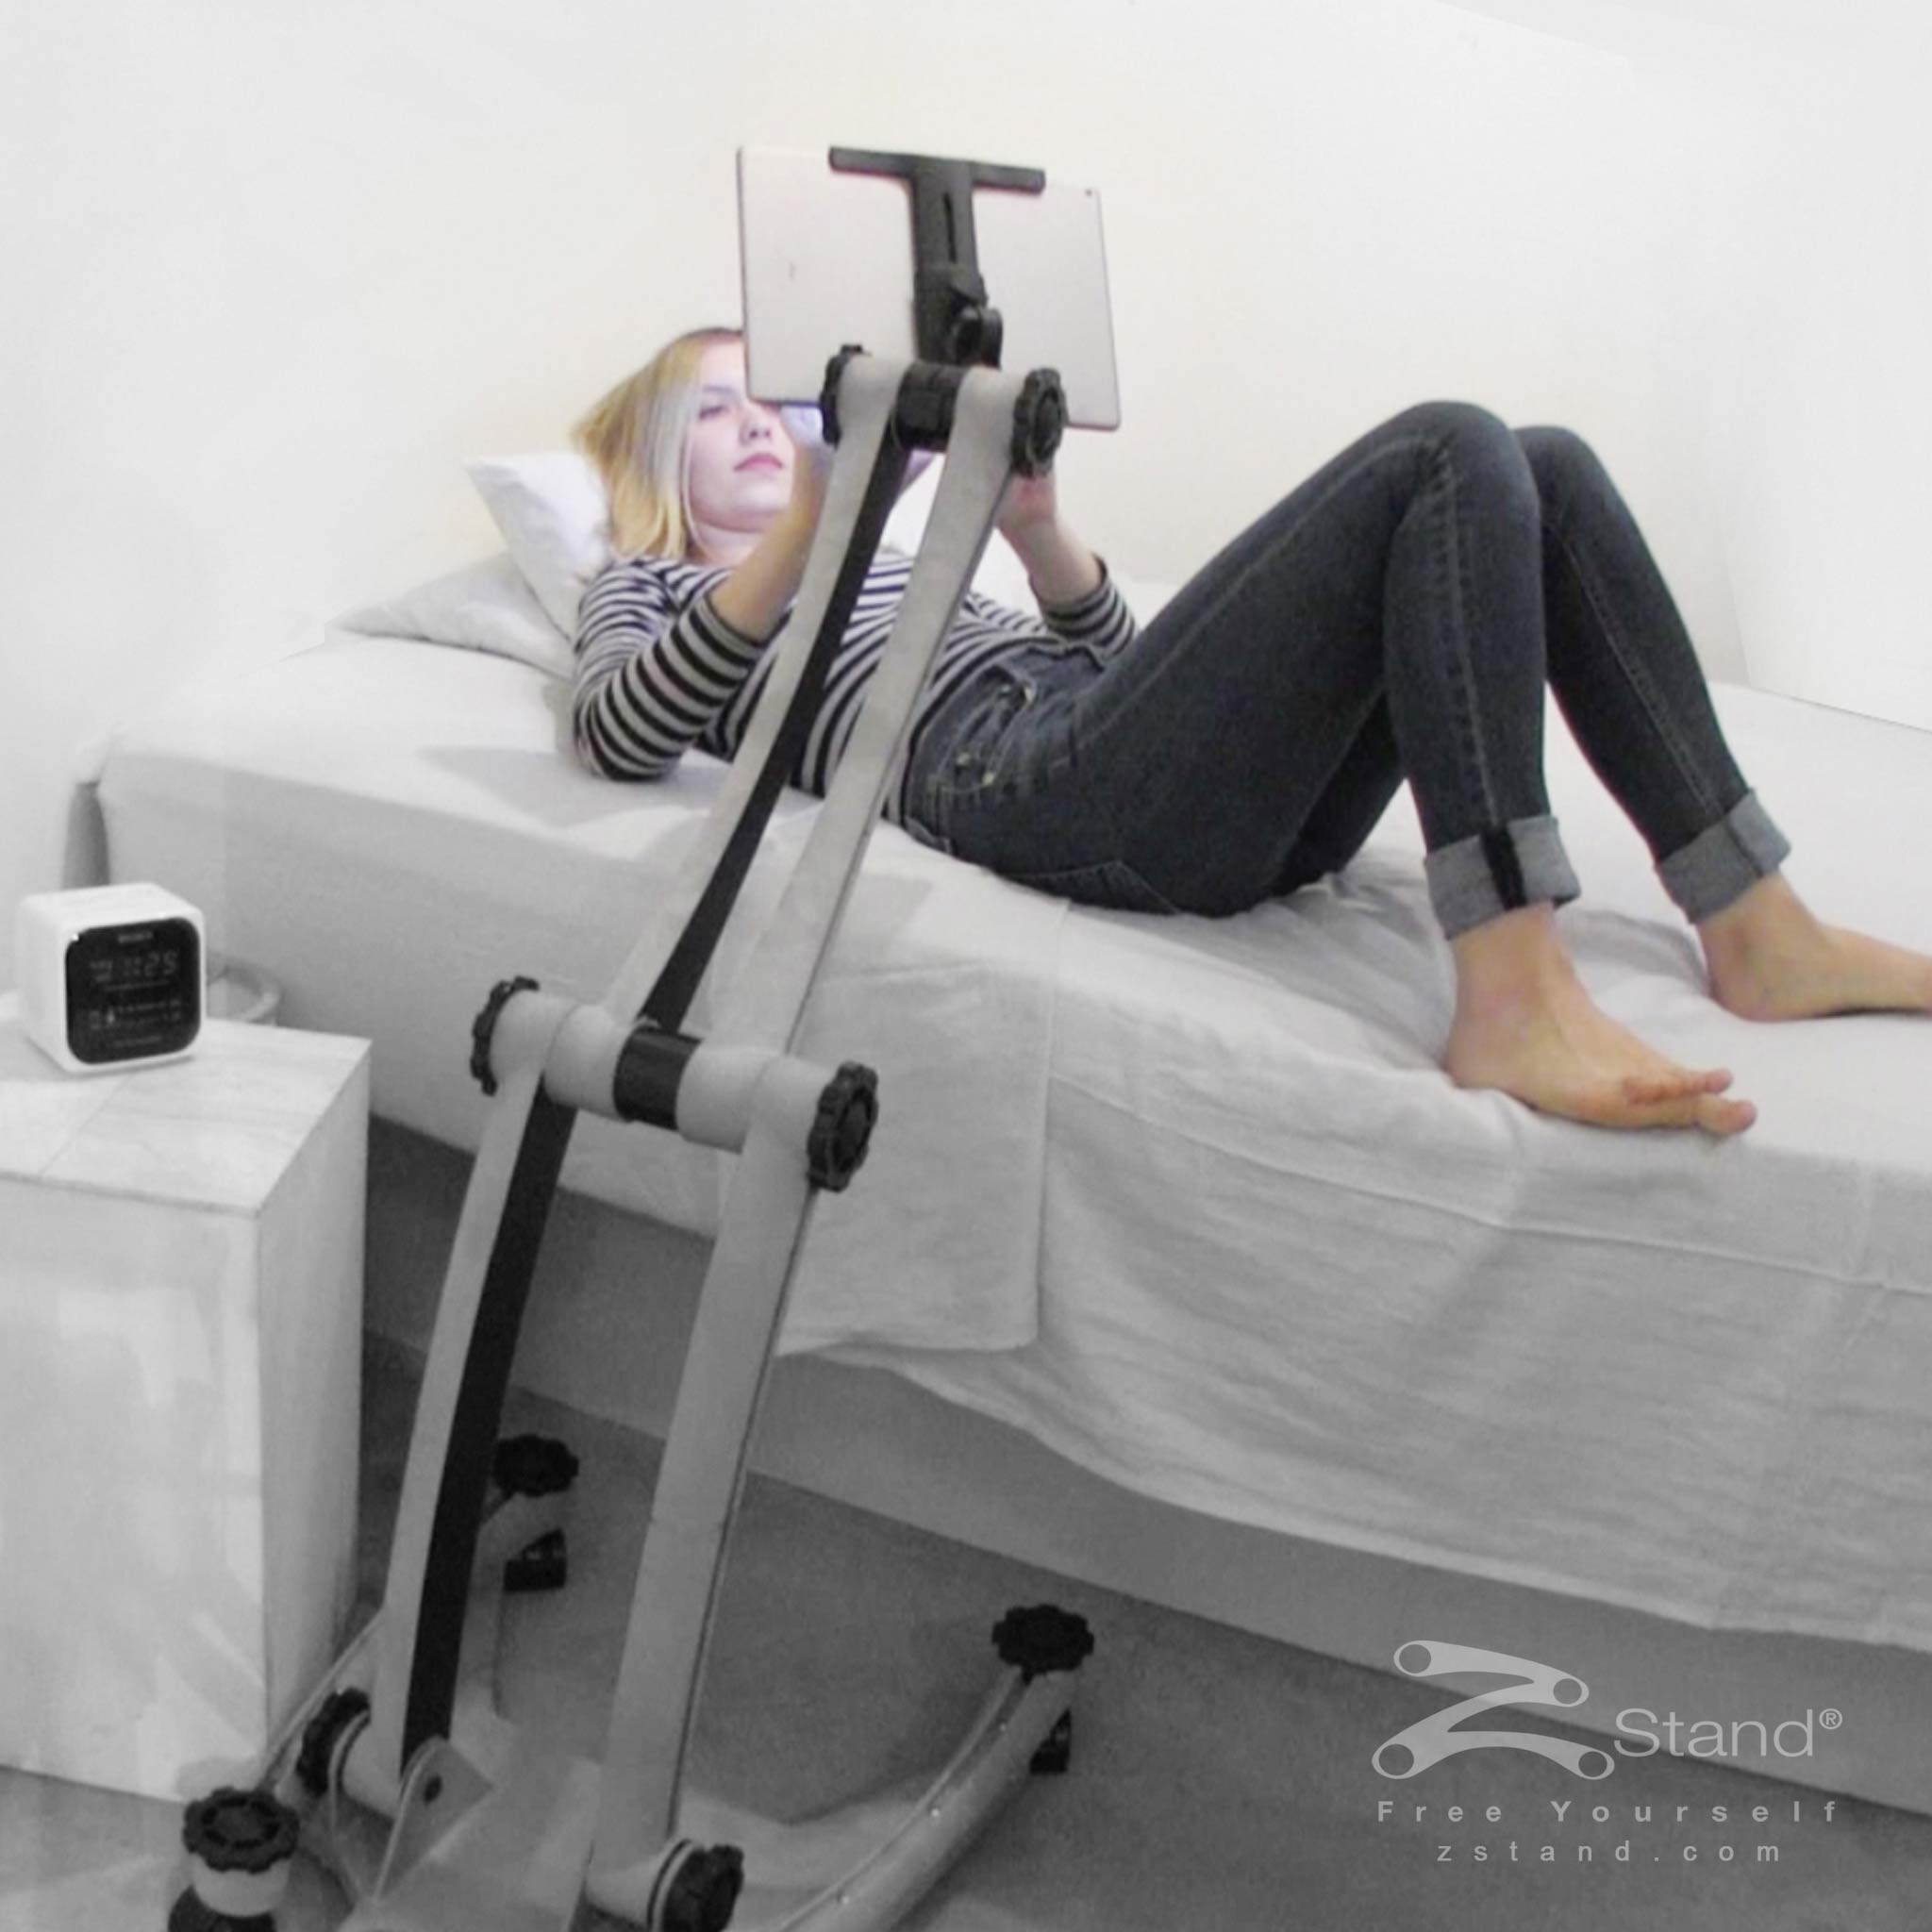 Image of a woman lying down in bed enjoying her tablet device hands free thanks to the ZStand Sportster.